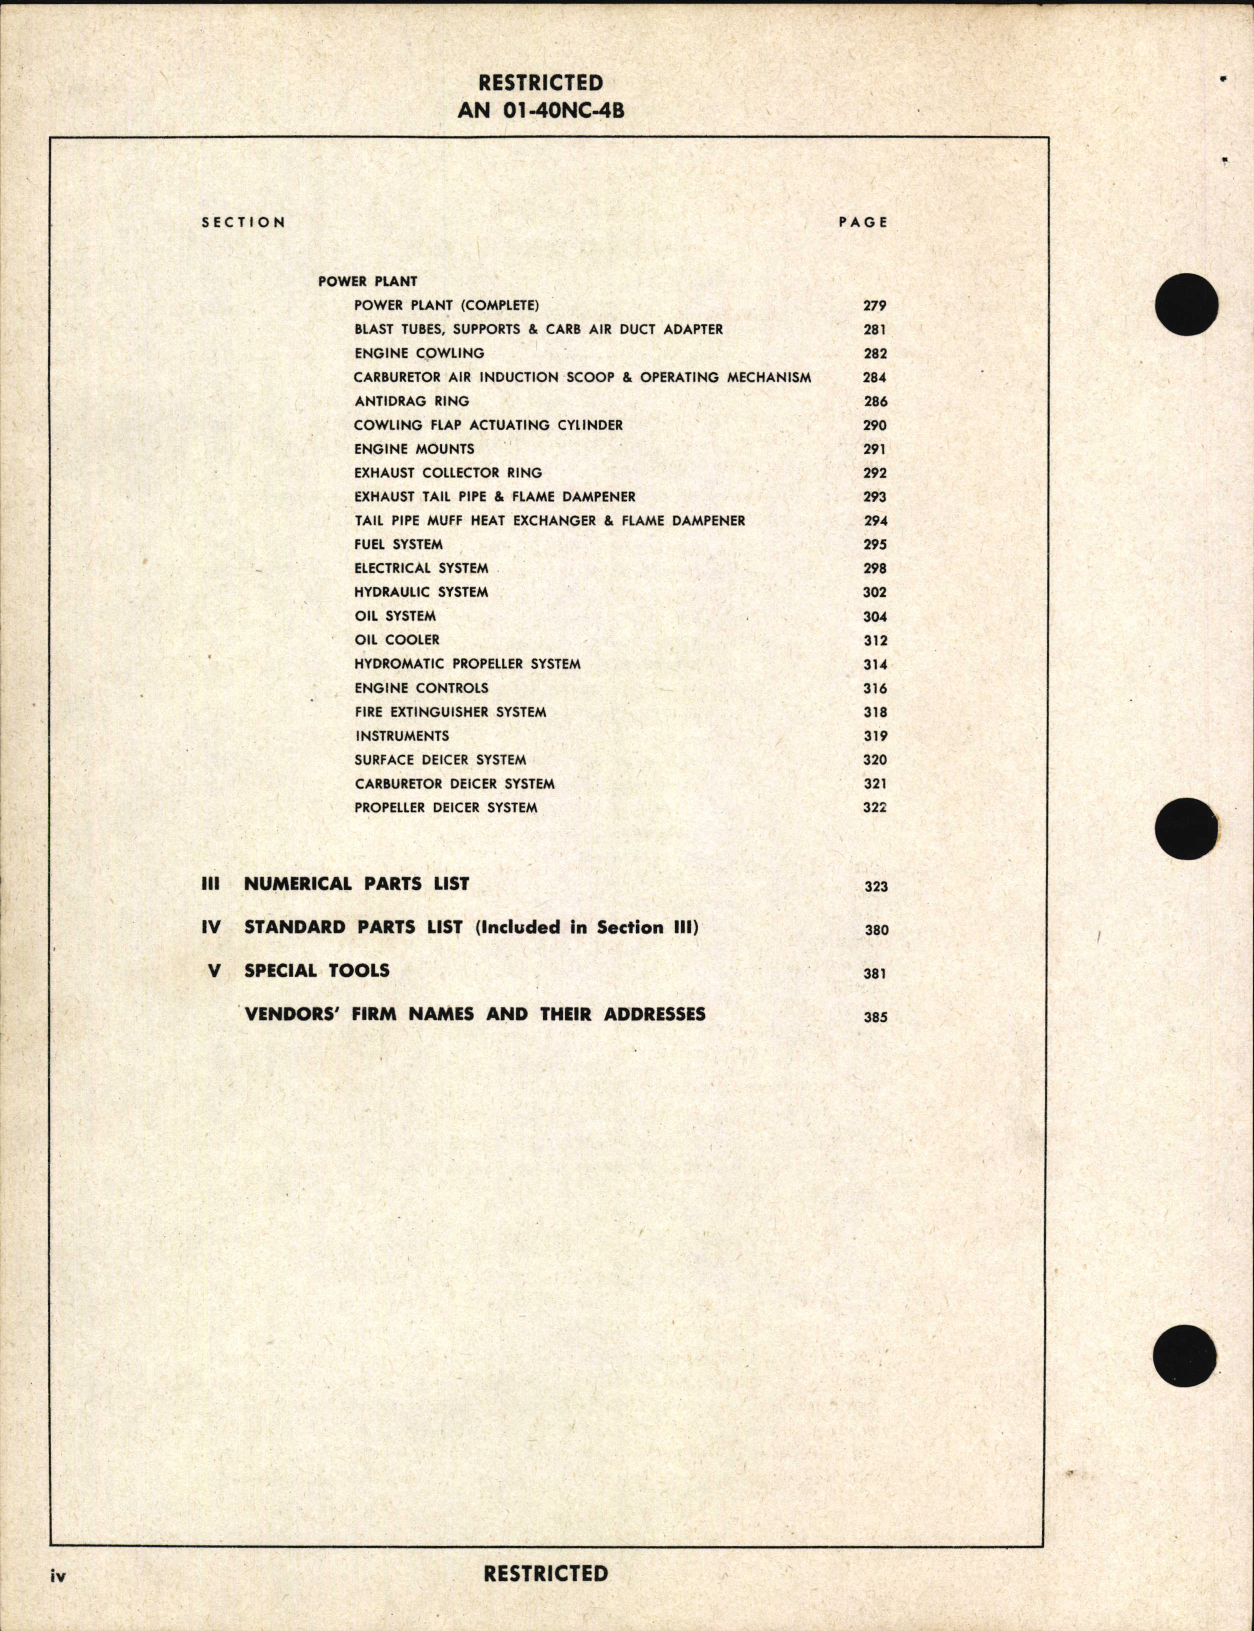 Sample page 8 from AirCorps Library document: Parts Catalog for C-47A and R4D-5 Airplanes